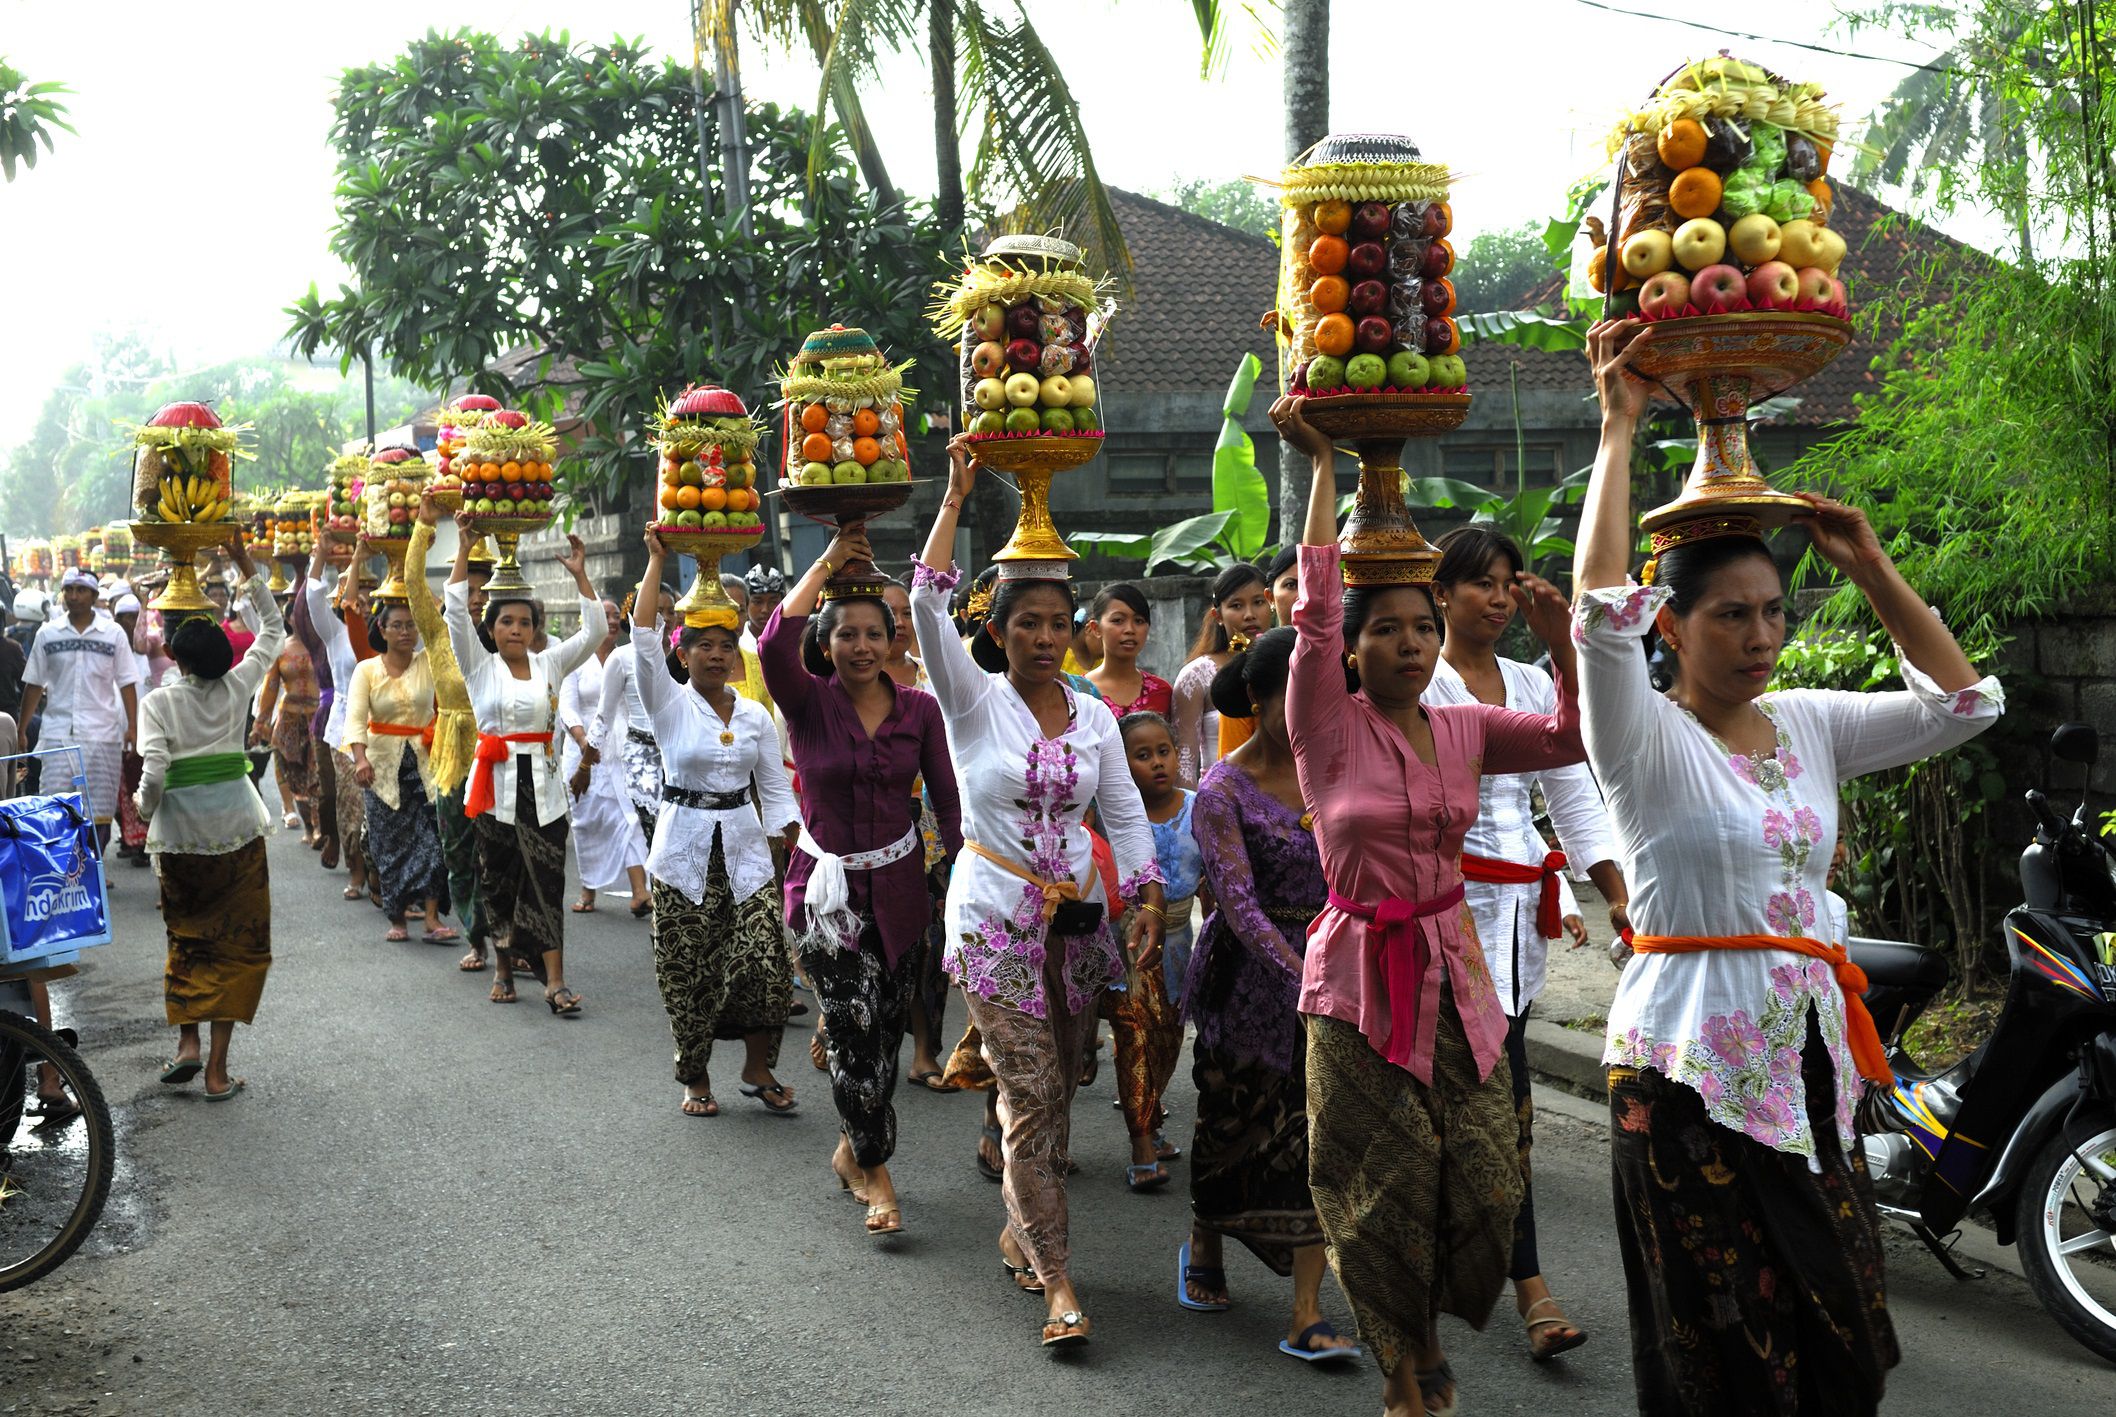 Celebrating the Galungan Holiday in Bali